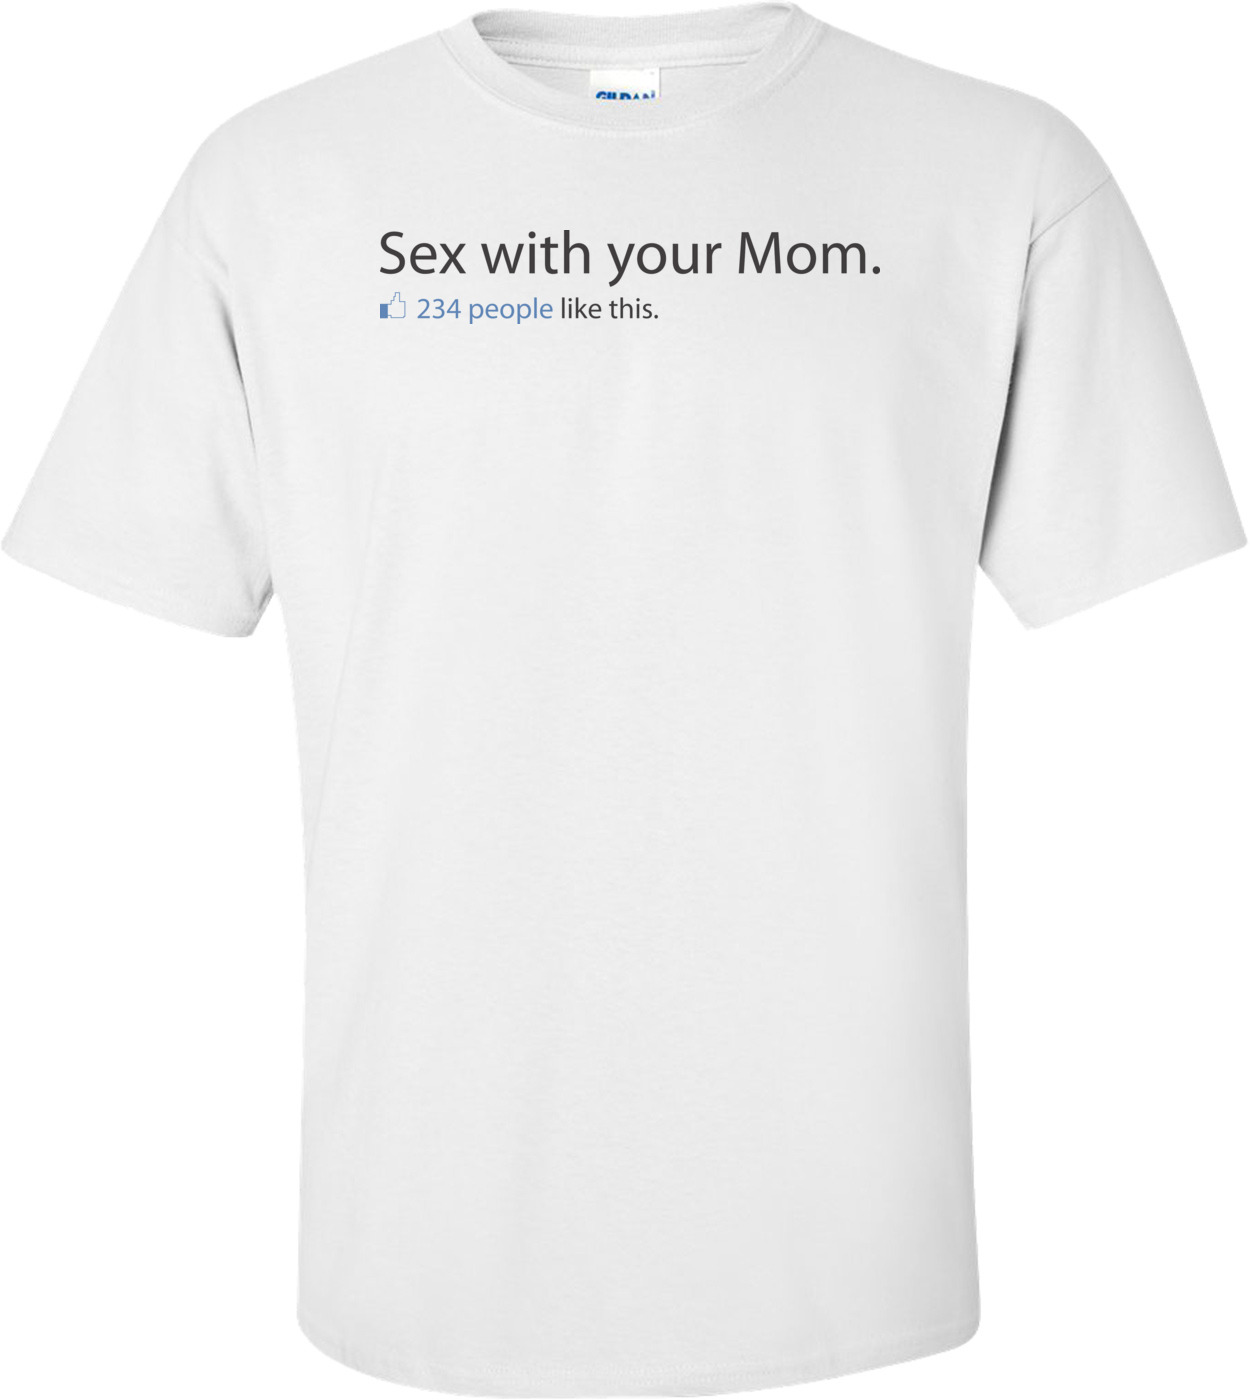 Sex With Your Mom Facebook Status T Shirt